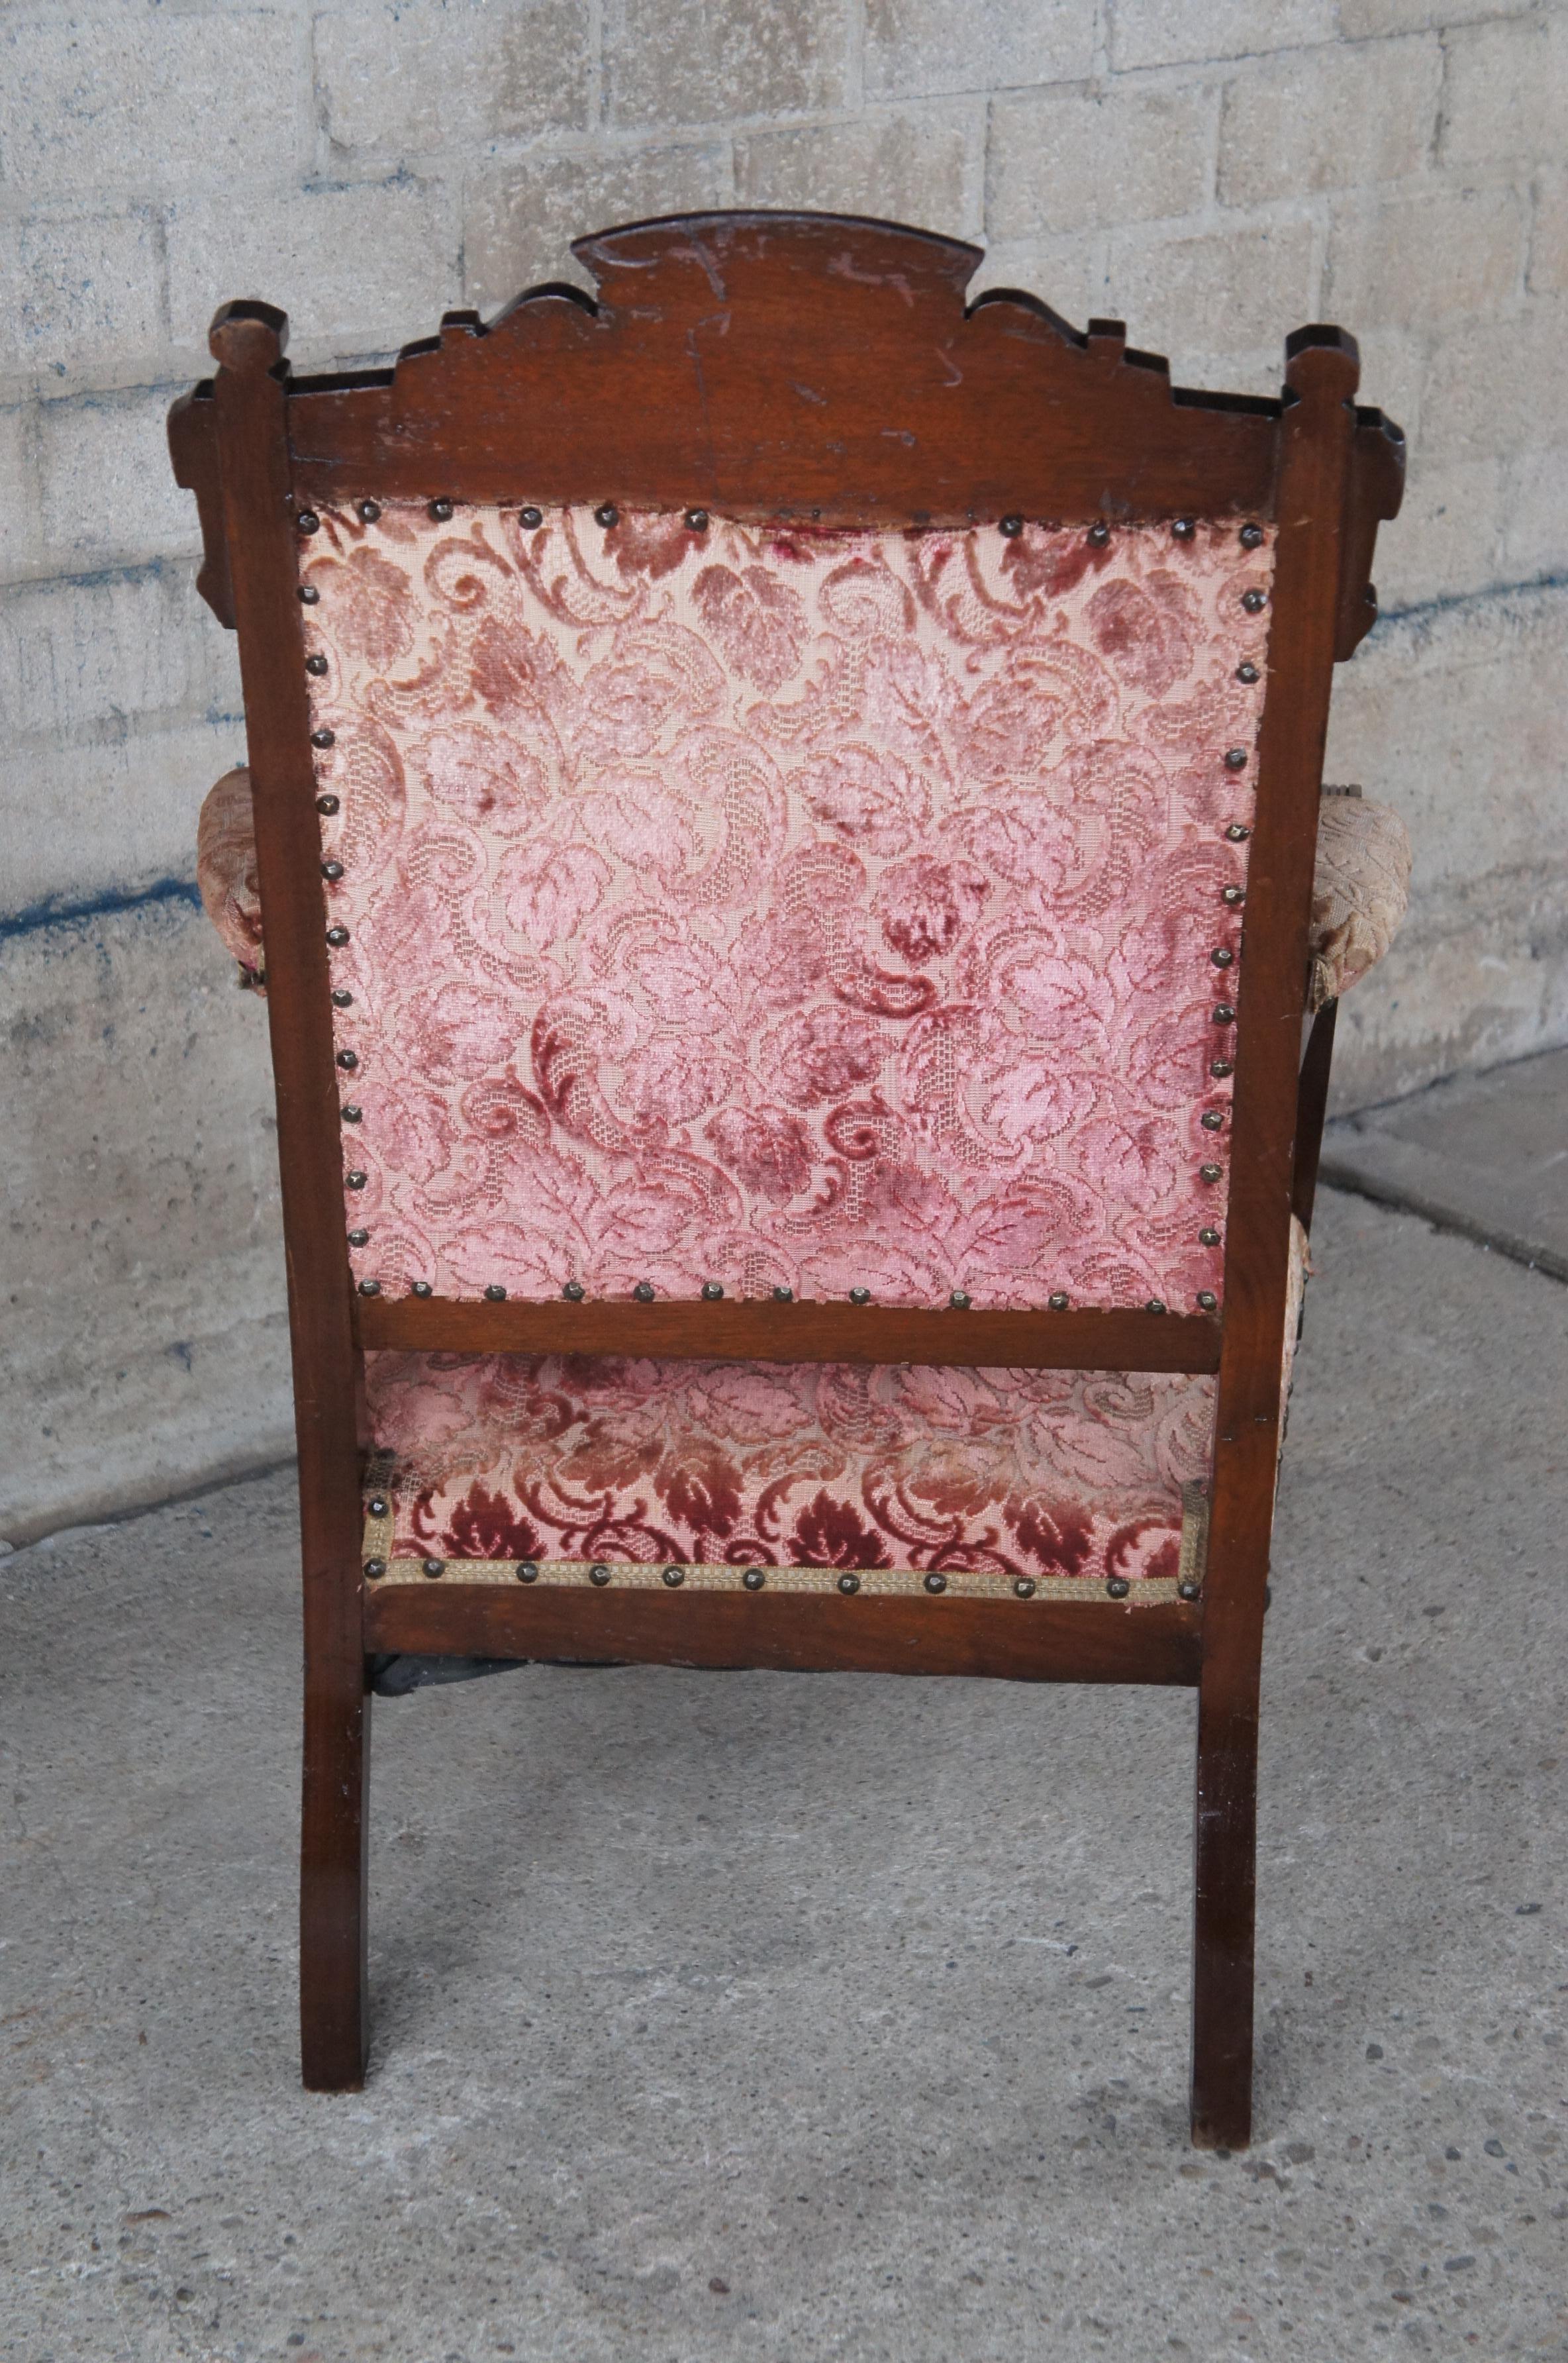 Antique Victorian Eastlake Carved Walnut Gentleman's Parlor Fauteuil Arm Chair In Good Condition For Sale In Dayton, OH